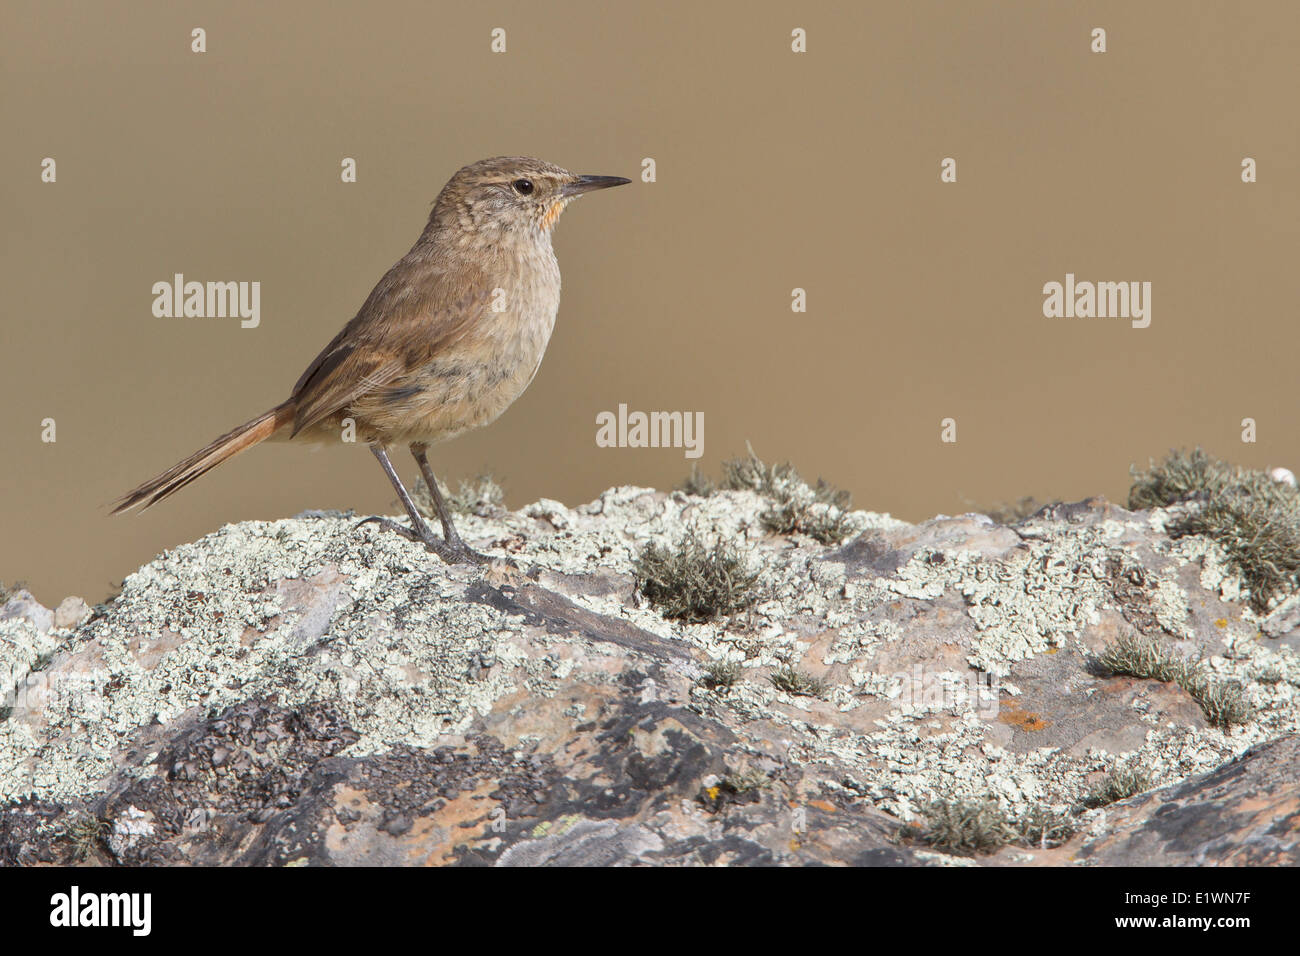 Puna Canastero (Asthenes sclateri) perched on a rock in Bolivia, South America. Stock Photo